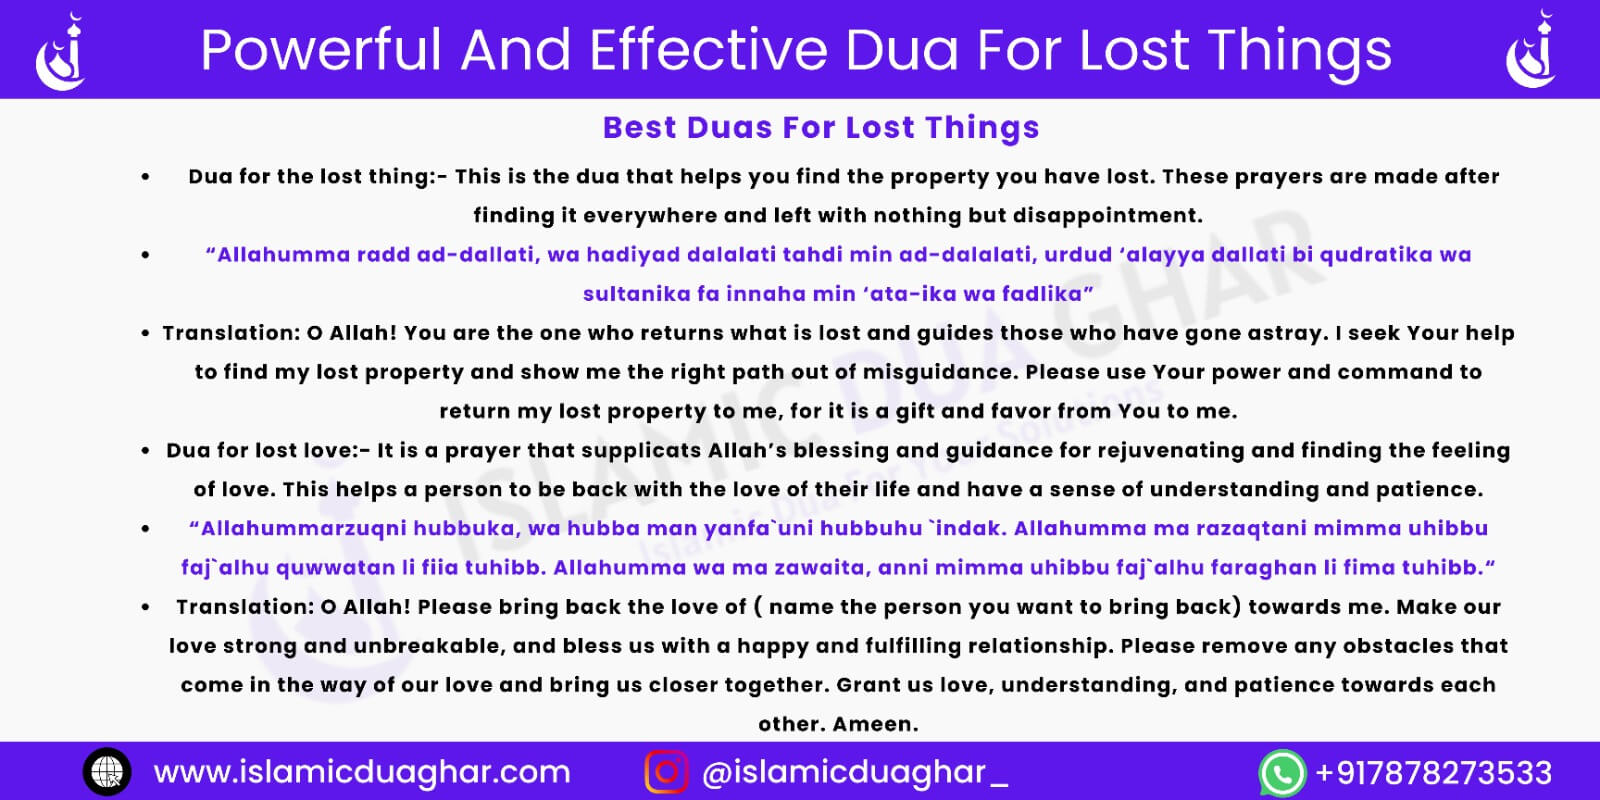 Dua For Lost Things